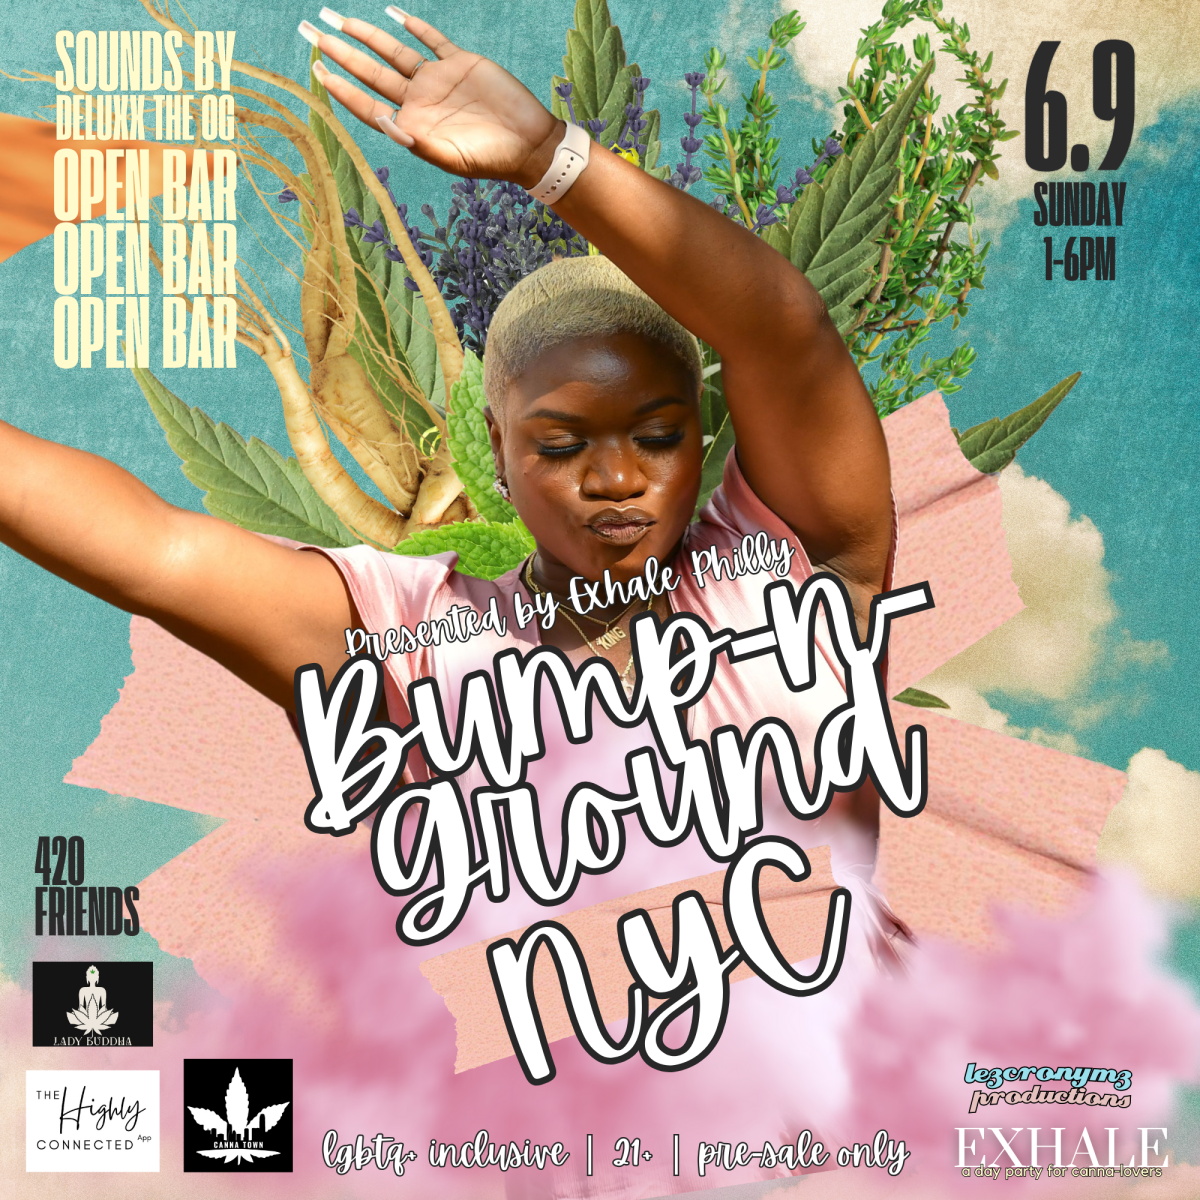 The EXHALE Bump-N-Ground Tour: NYC